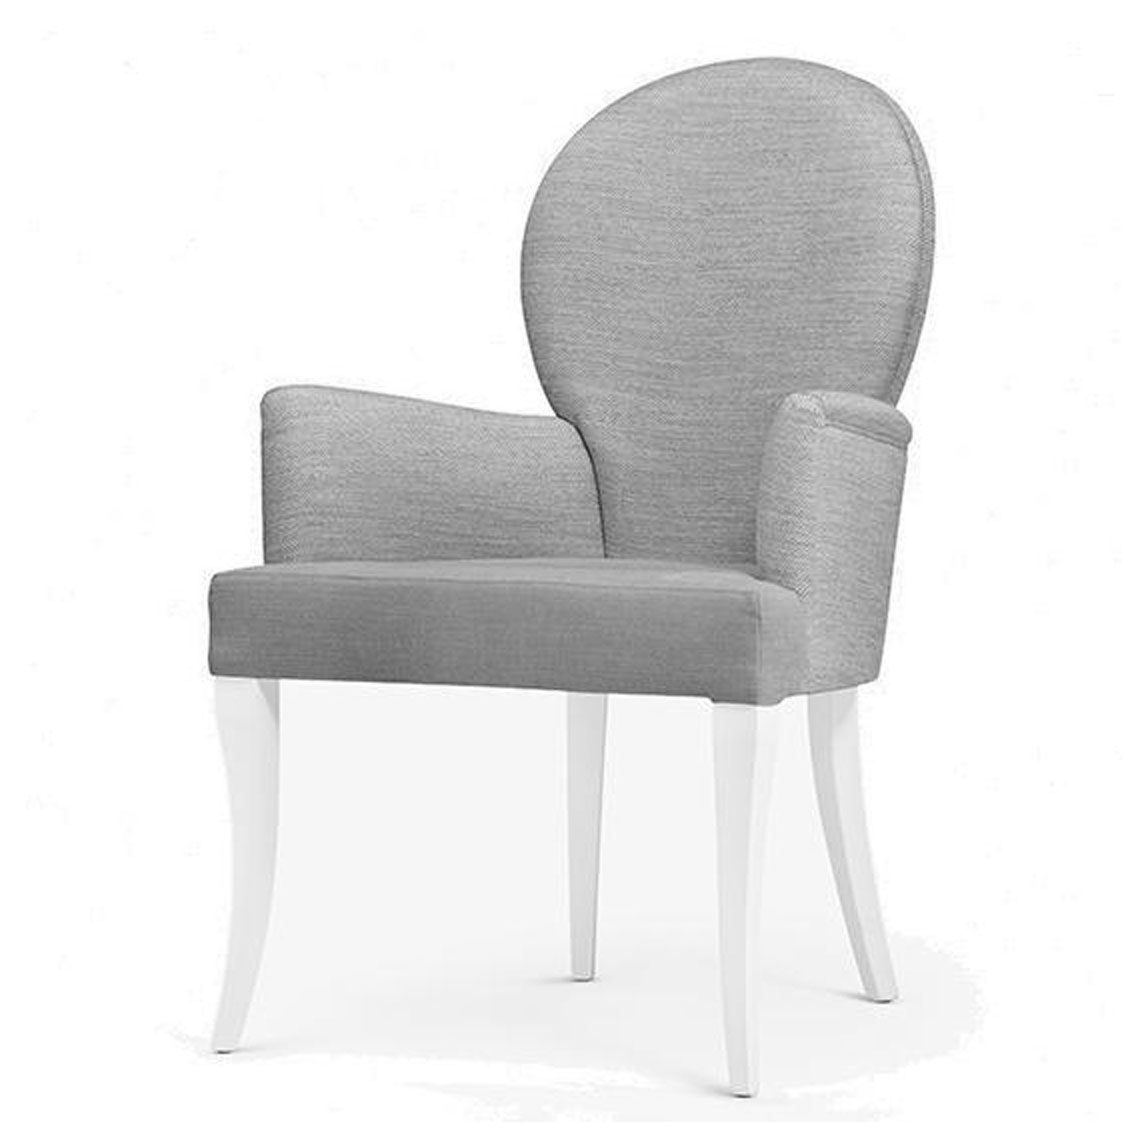 Zara Chair With Arms